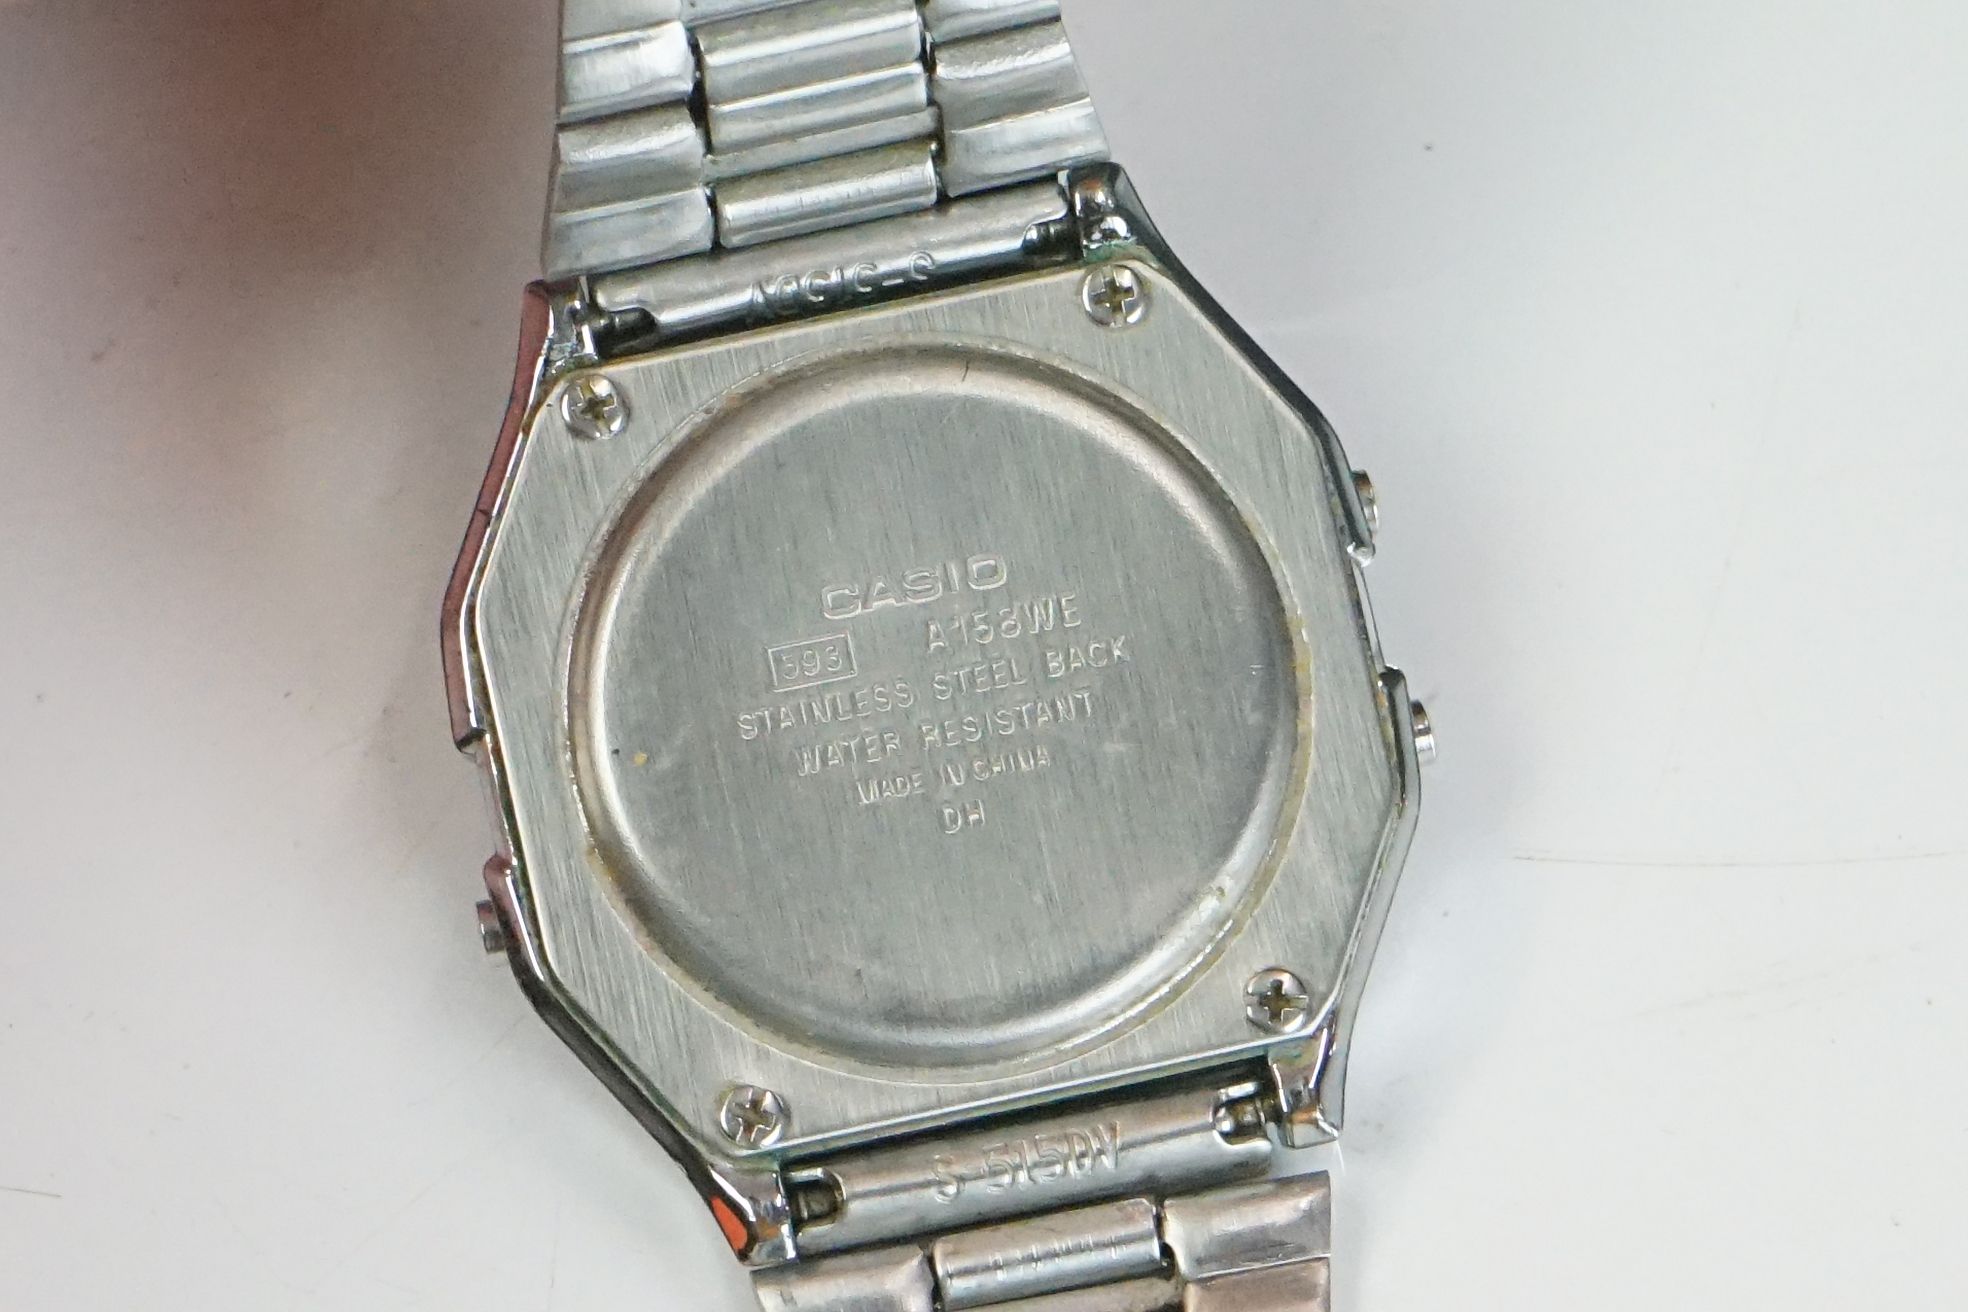 Collection of LCD Watches including Seiko, Casio, Lambda, etc - Image 8 of 14